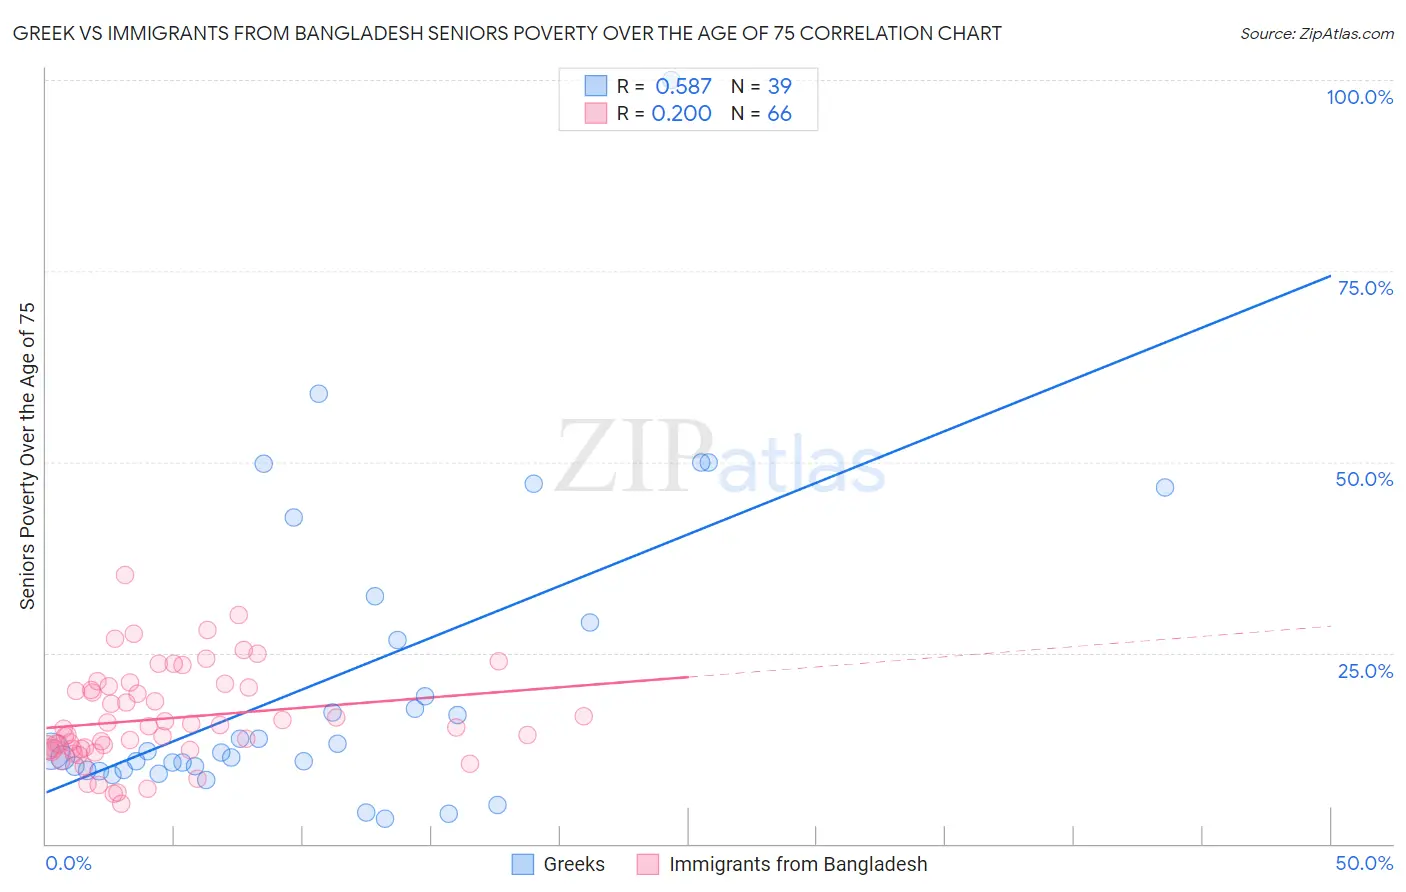 Greek vs Immigrants from Bangladesh Seniors Poverty Over the Age of 75